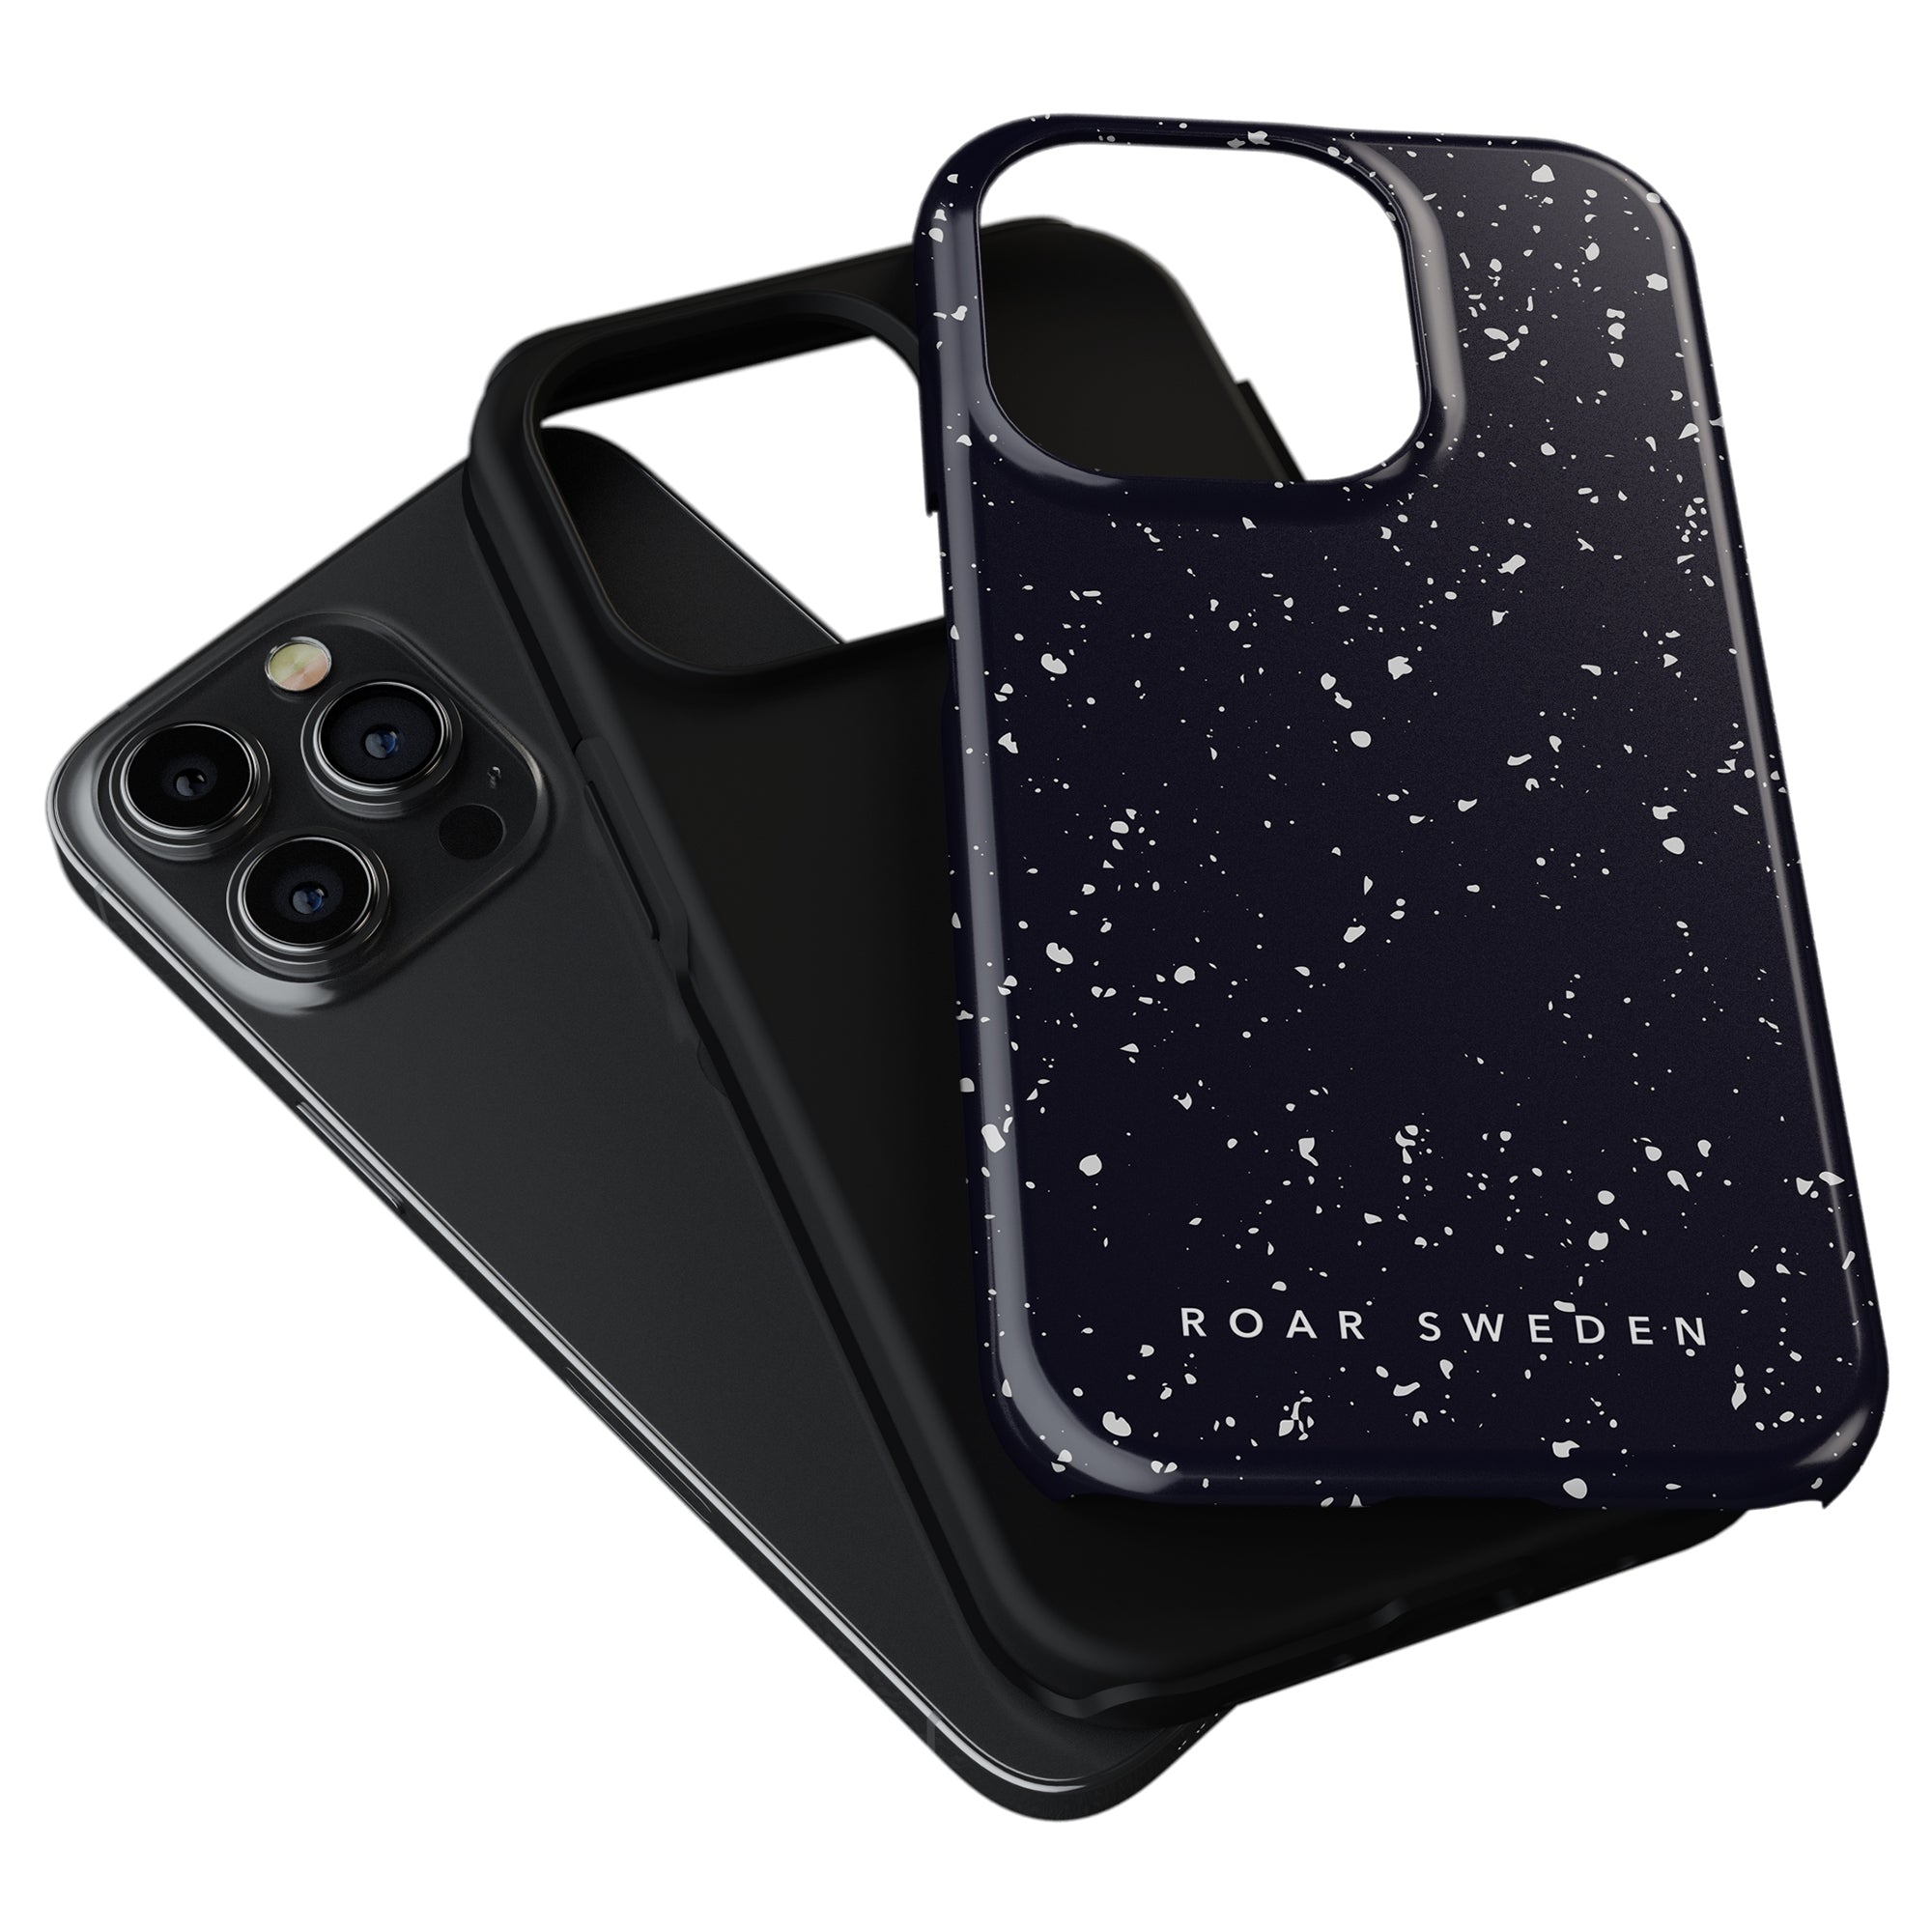 A black smartphone with a Night Stars - Tough Case beside it, labeled "roar Sweden.